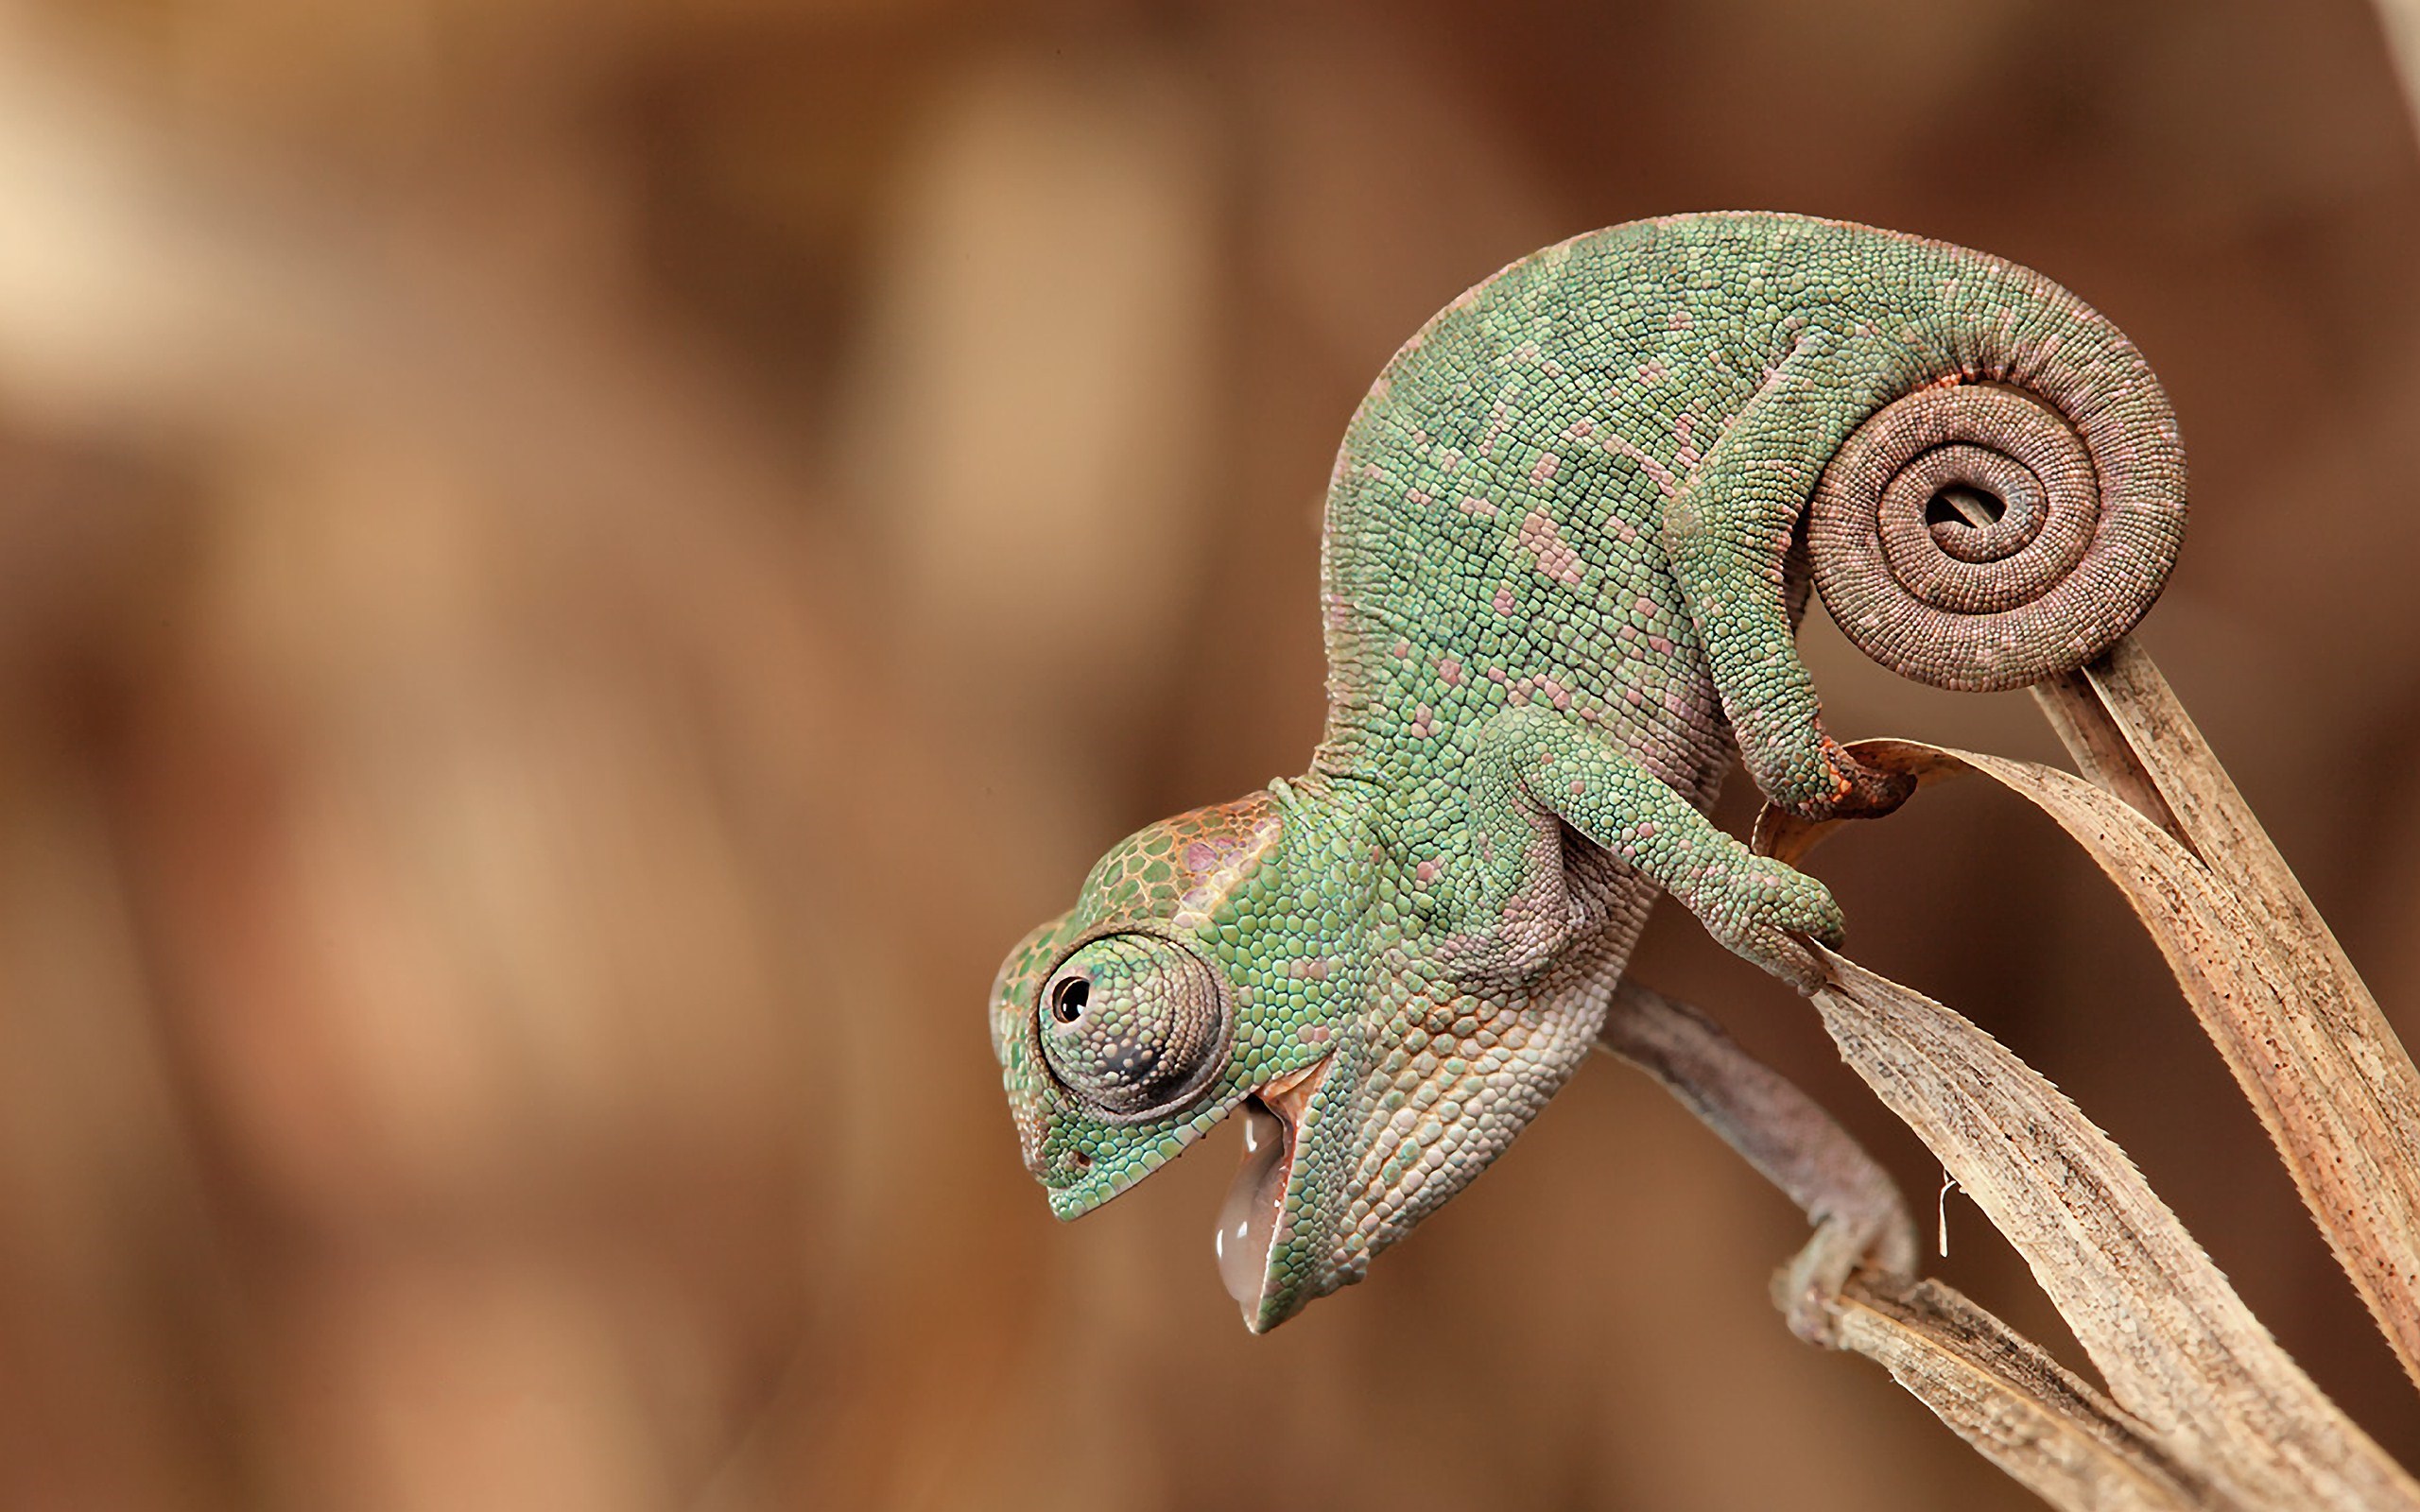 Cute Chameleon Portrait is free HD wallpaper. This wallpaper was upload at July 1, 2015 upload by photographyw in Animal.